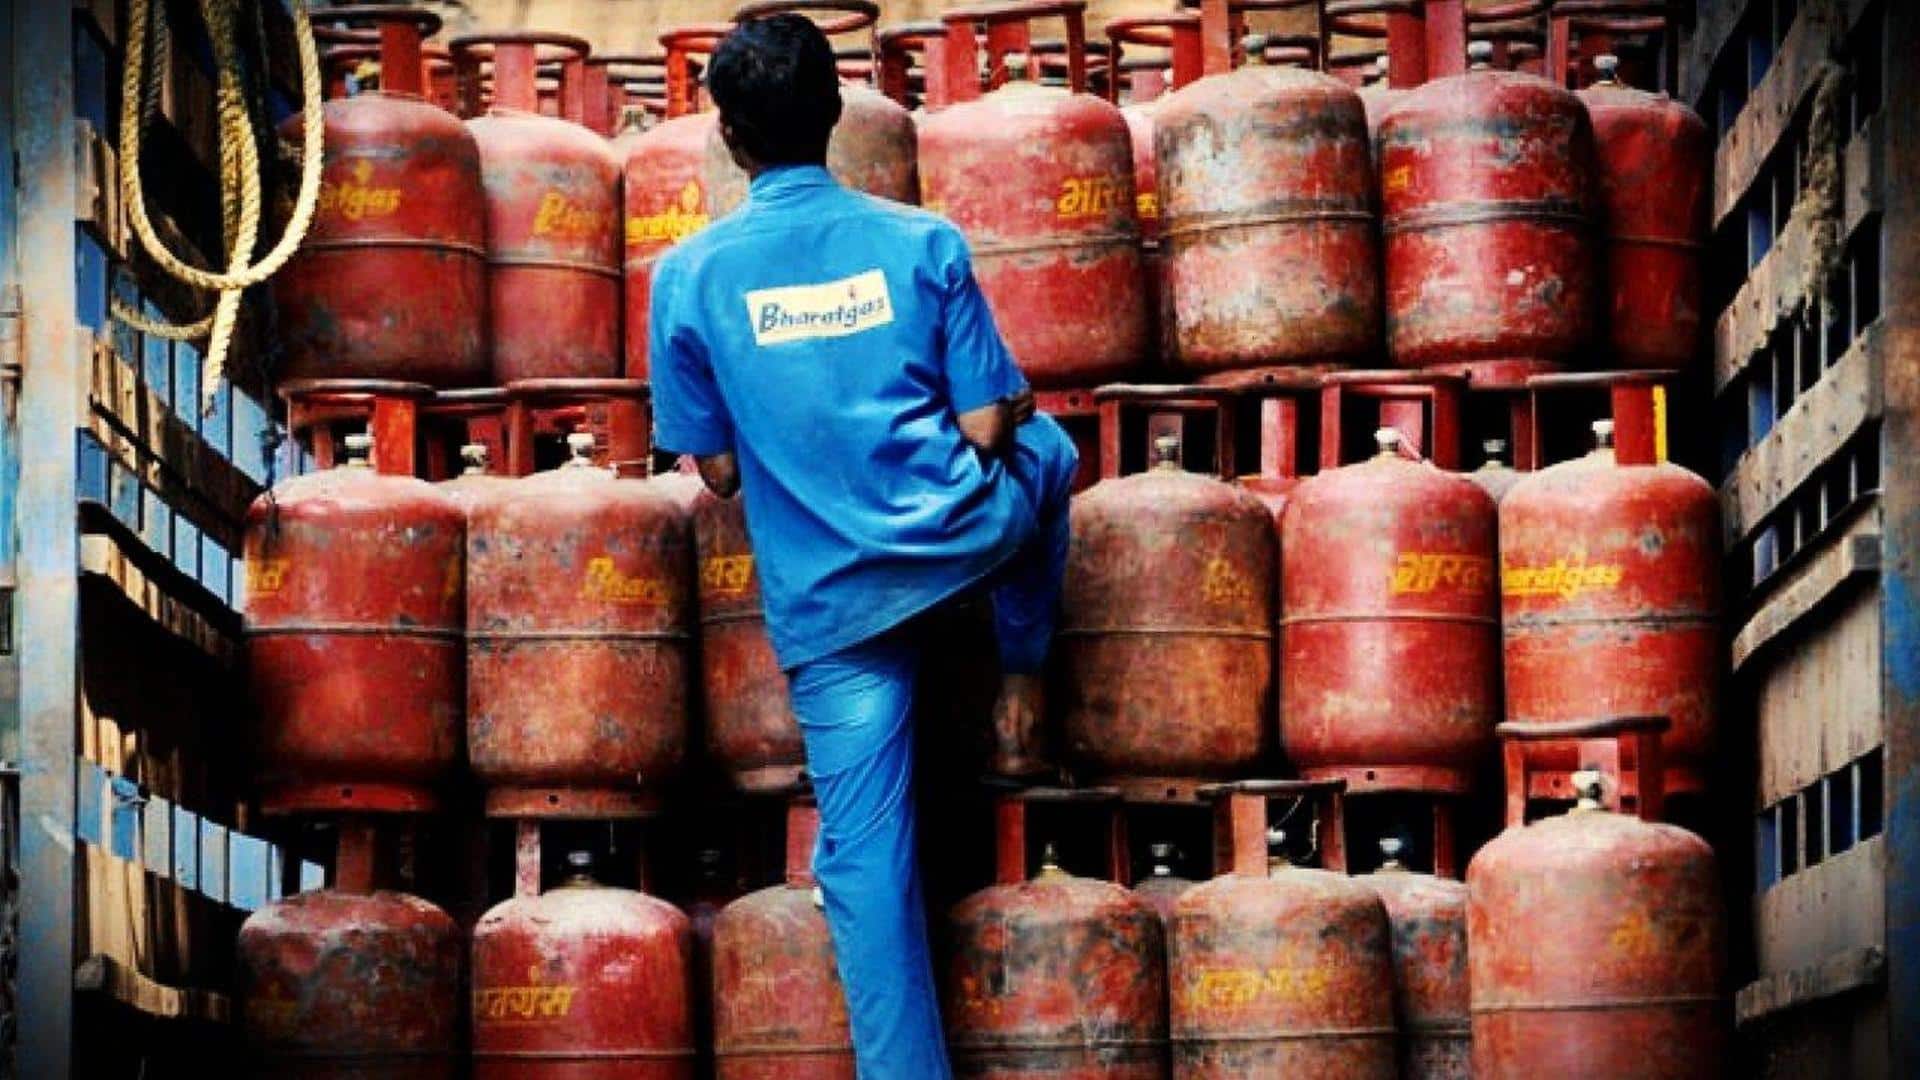 Commercial LPG cylinder price increased by Rs. 7